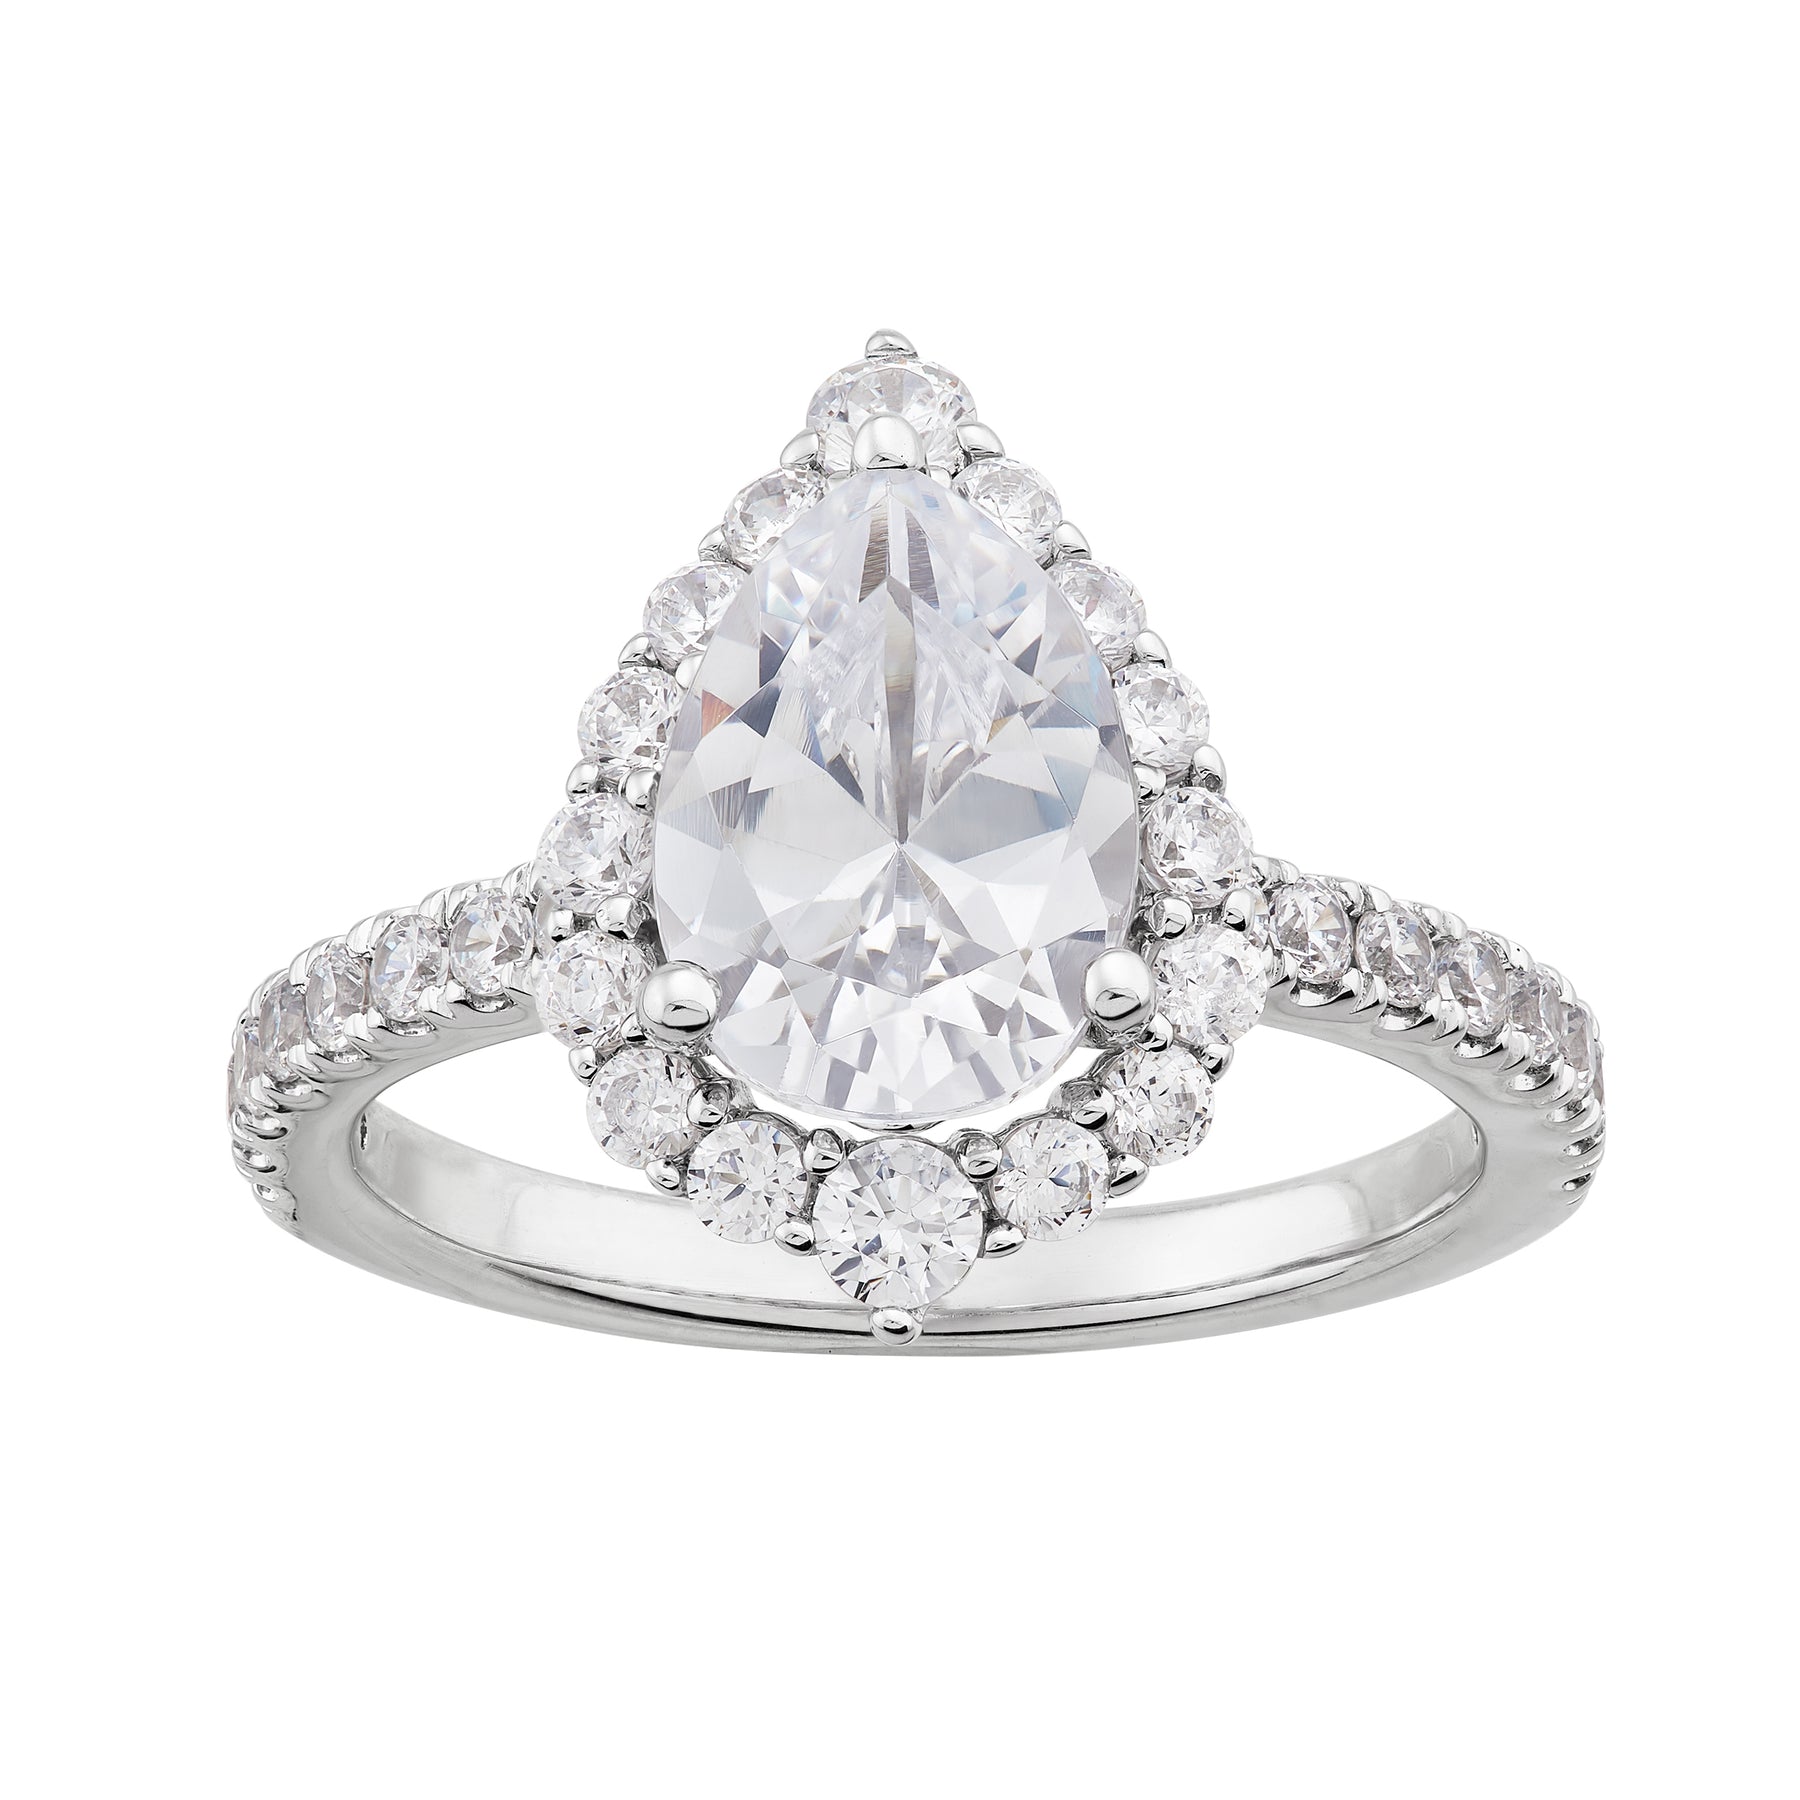 Jewelry Store In Sedalia, MO | Bichsel Jewelry | Engagement Rings